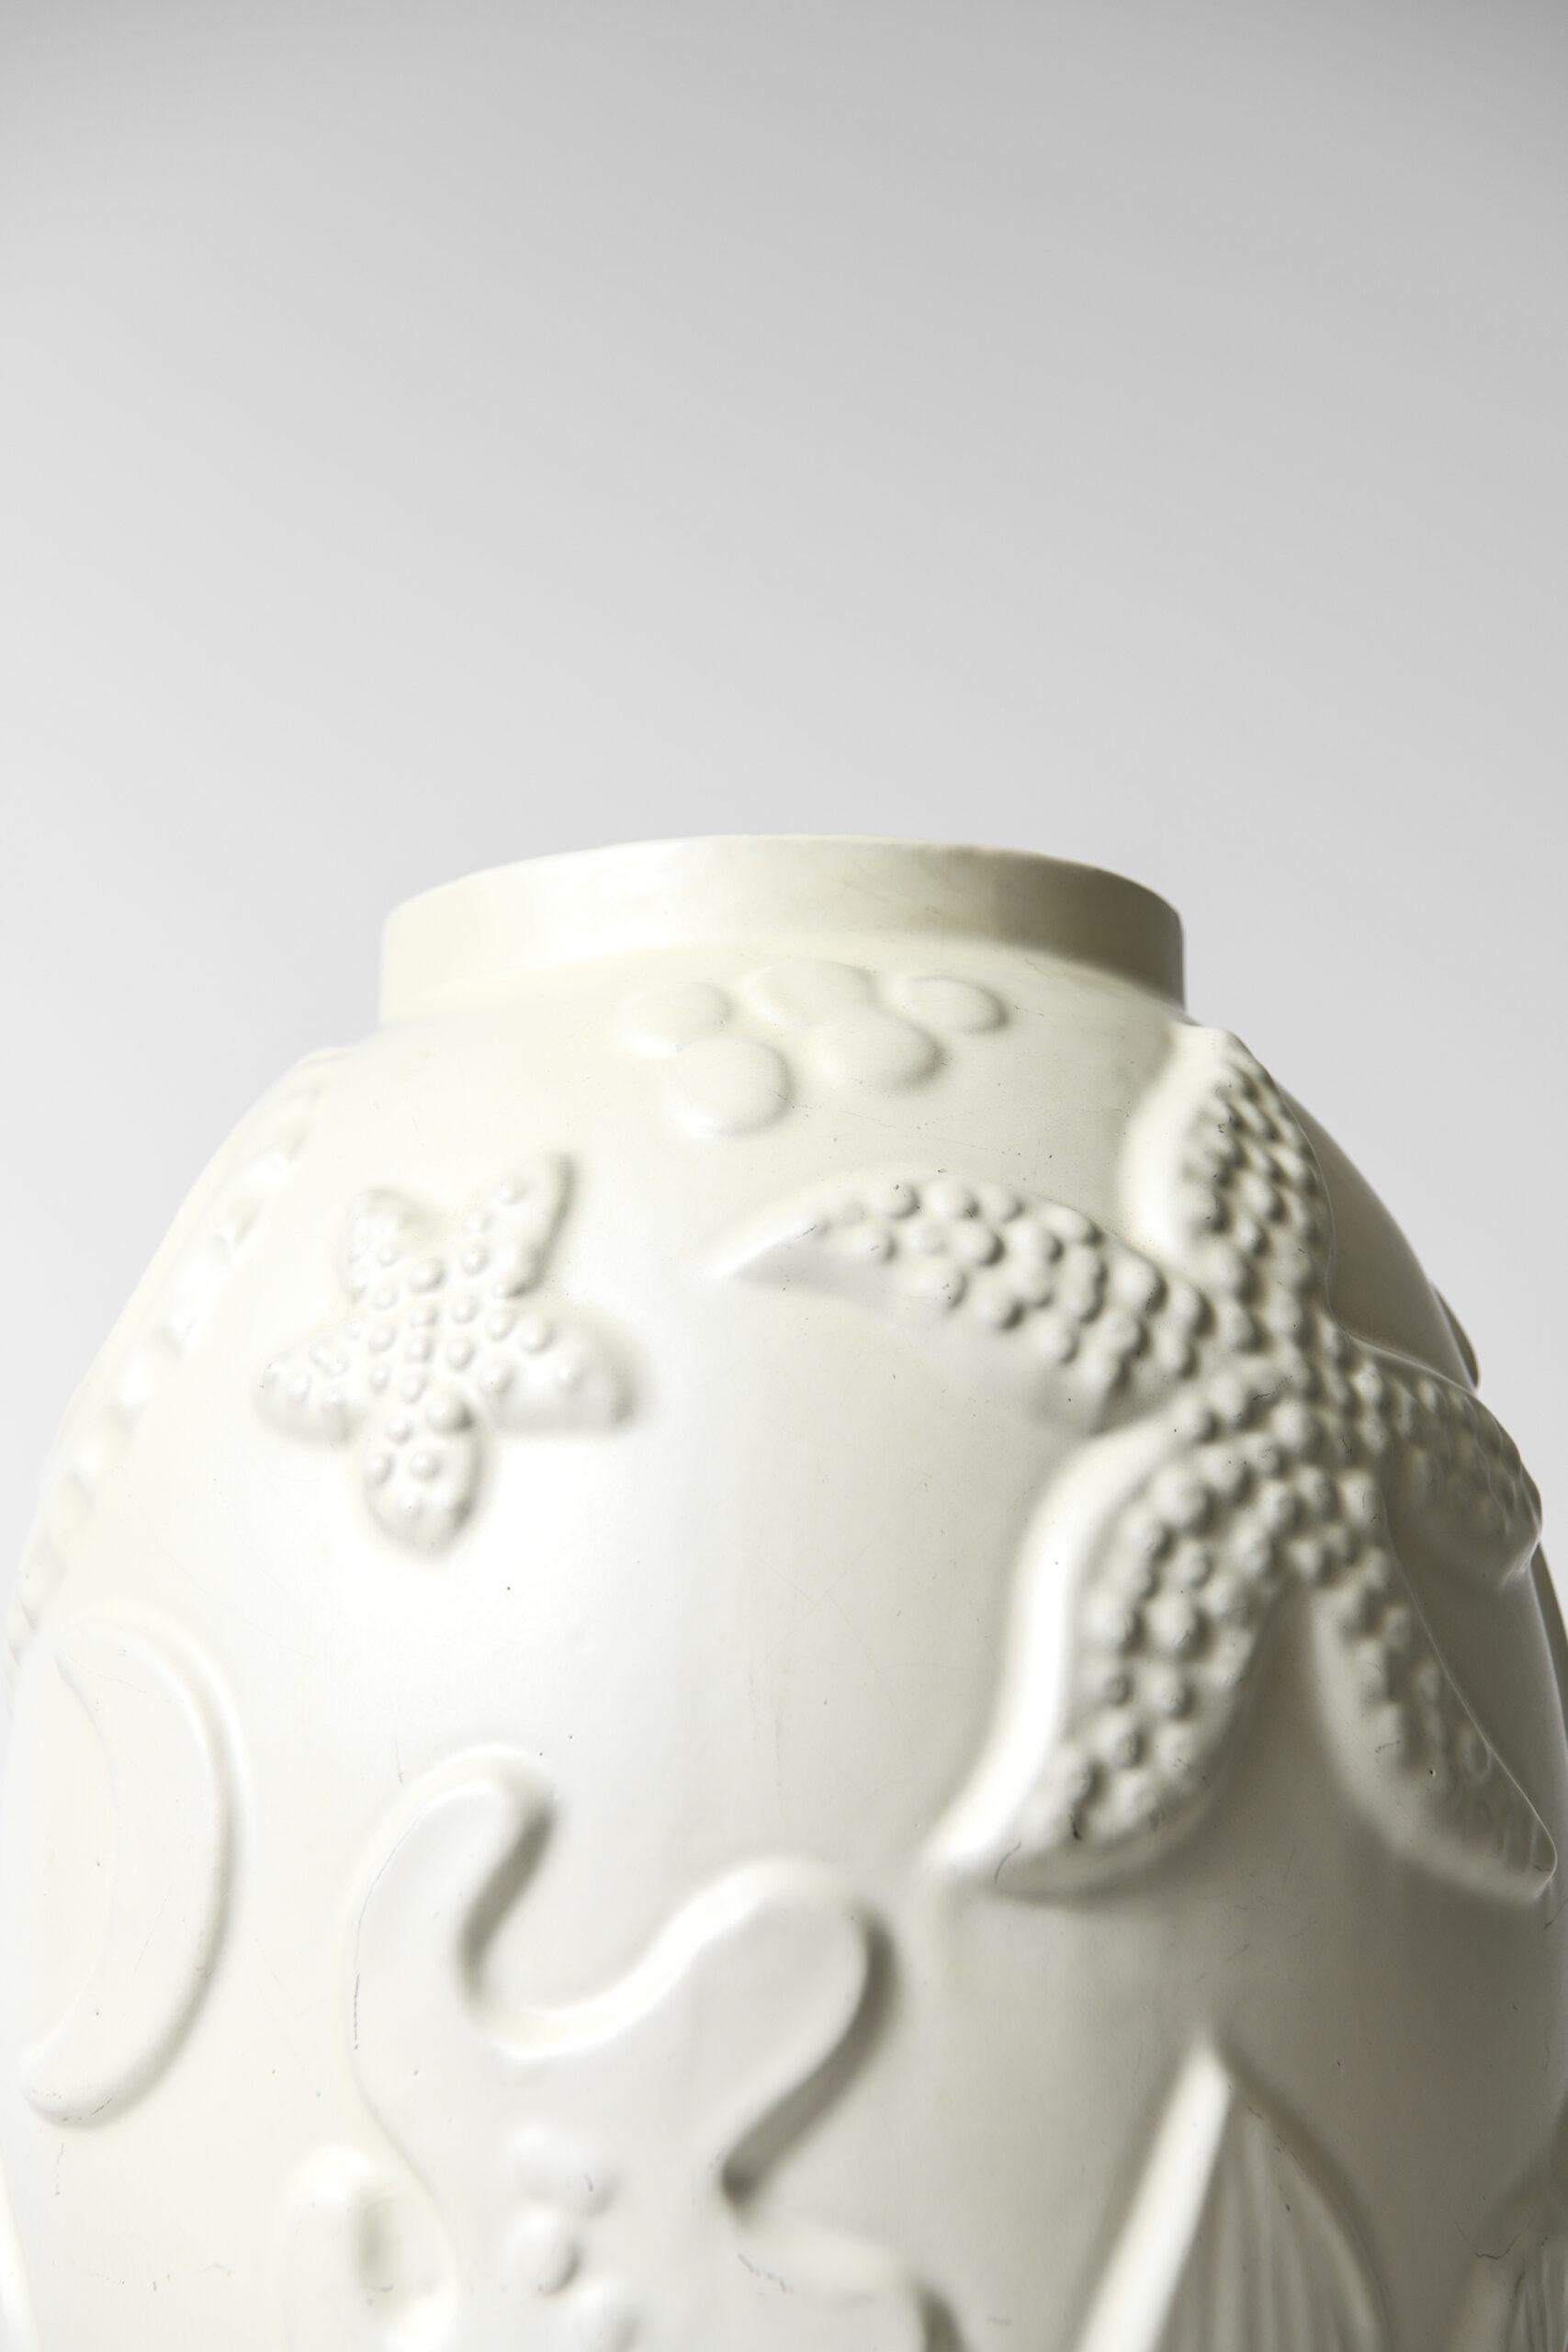 Rare floor vase designed by Anna-Lisa Thomson. Produced by Upsala Ekeby in Sweden.
 